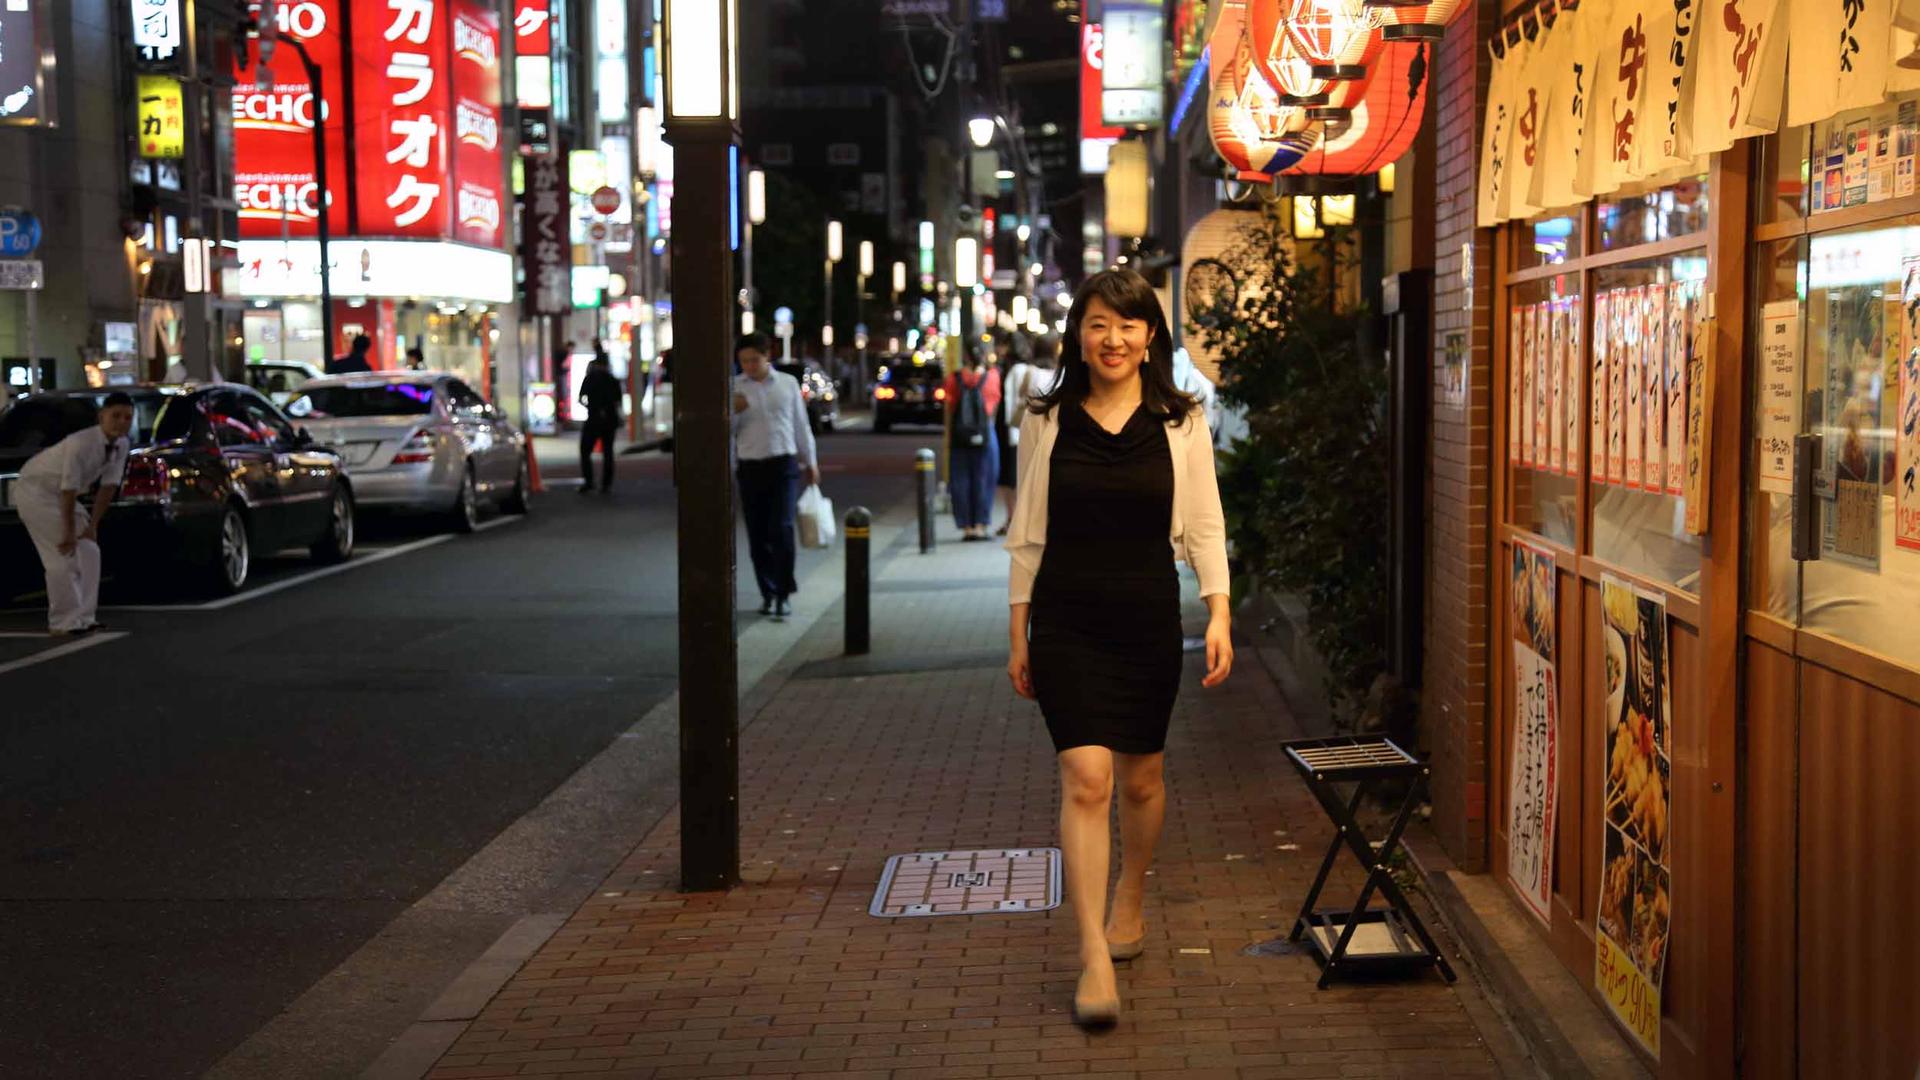 A woman in a black dress stands on a city street in Japan. Signs with Japanese characters are behind her, on restaurants and billboards.